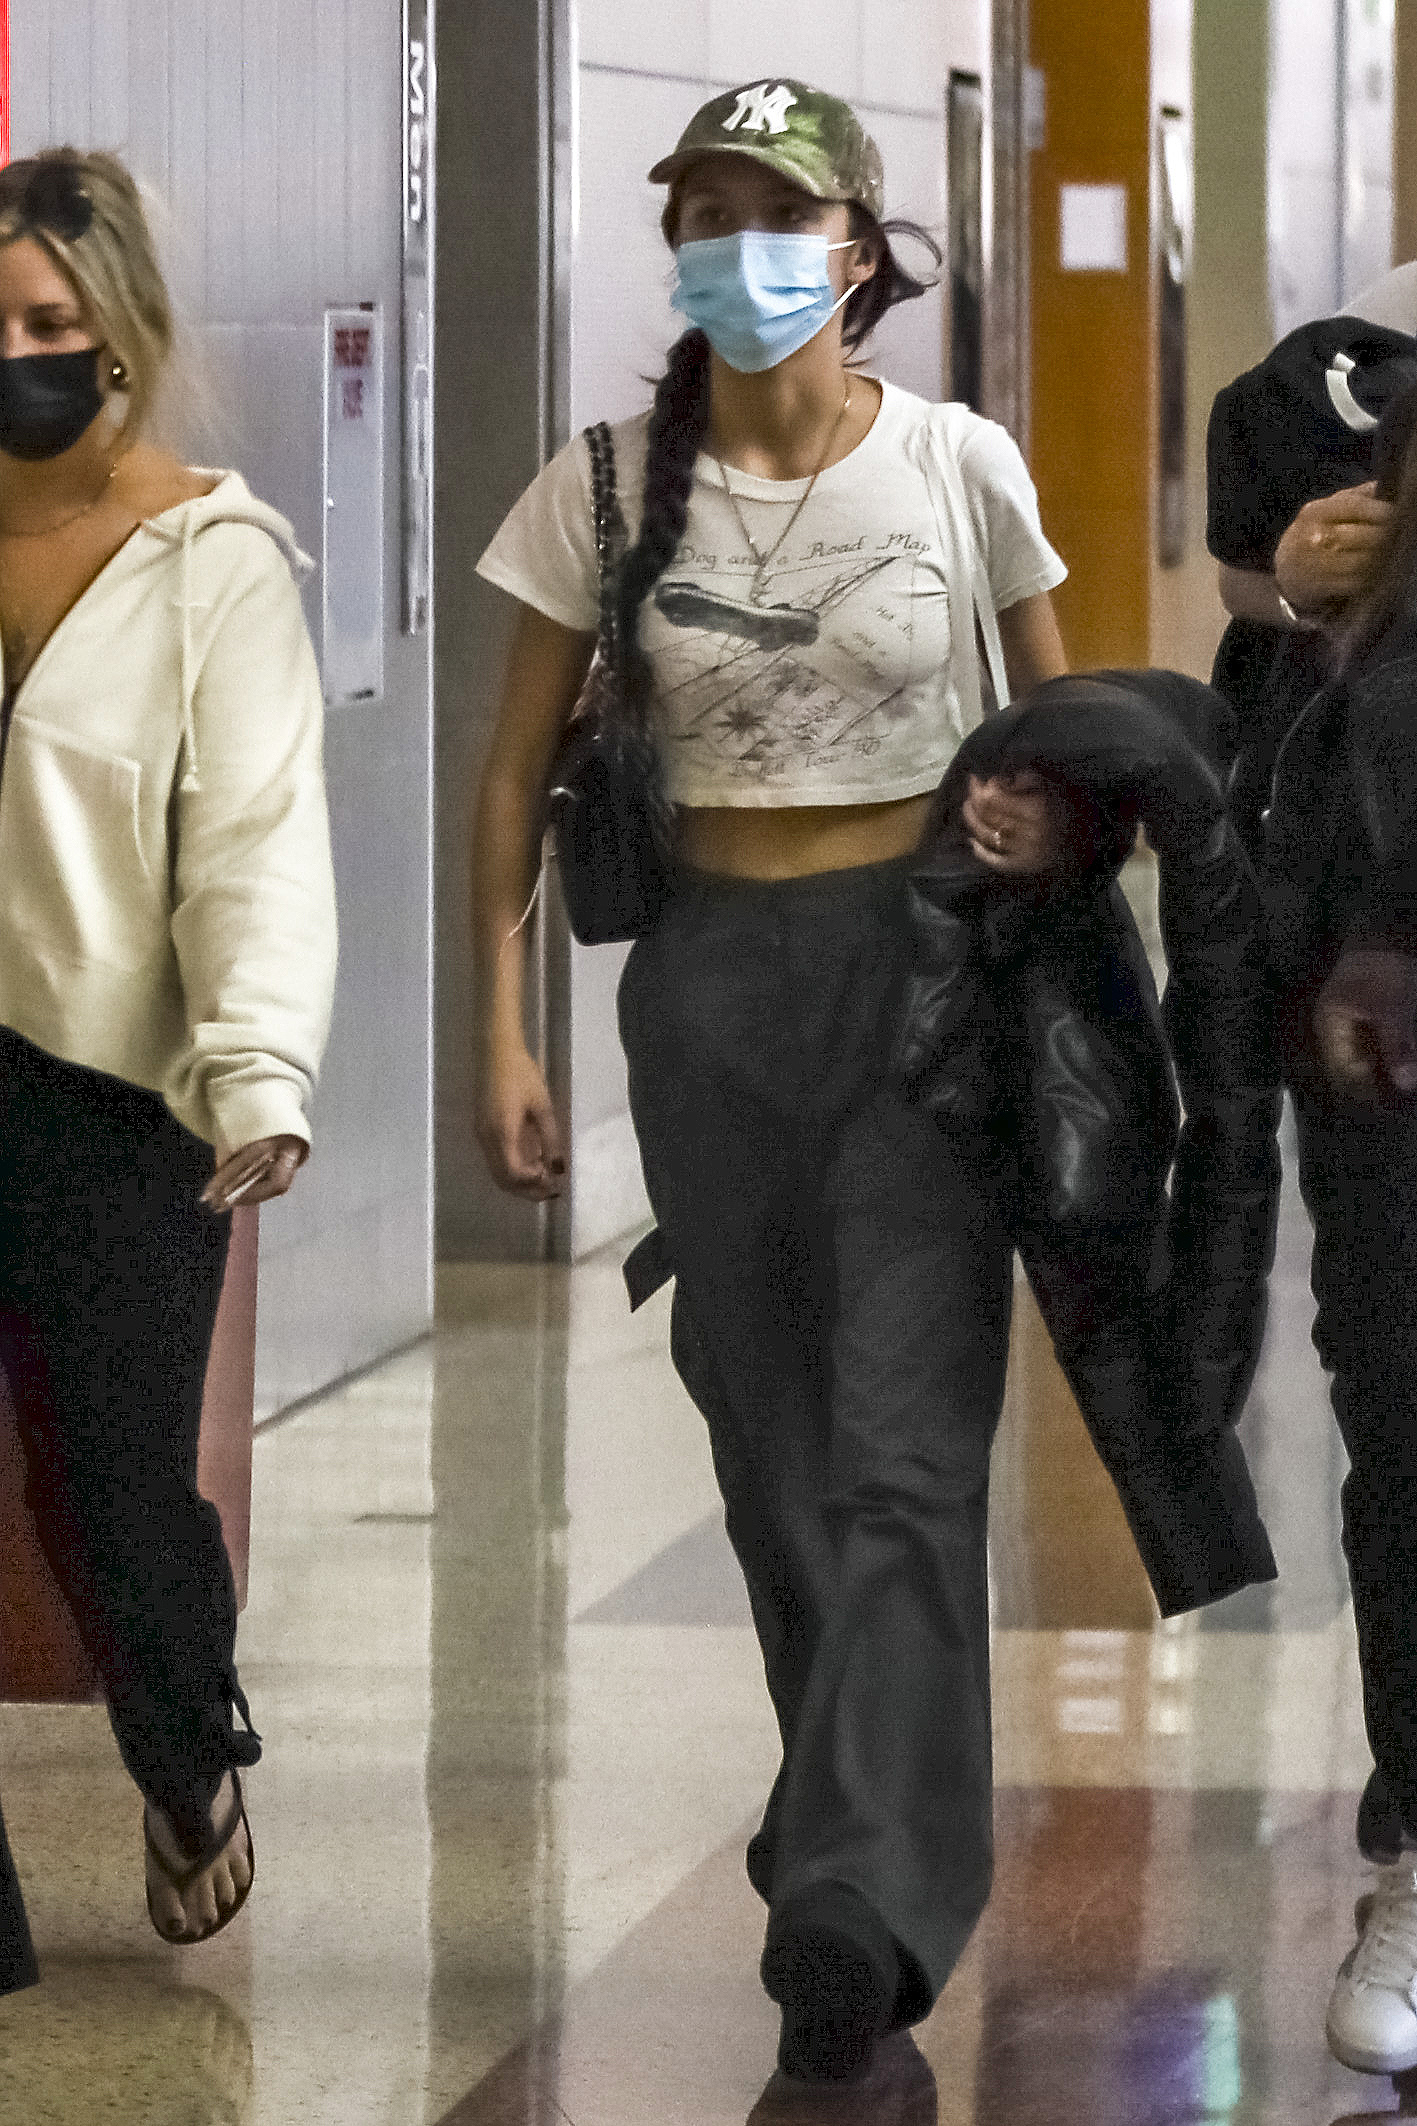 Olivia Rodrigo was photographed at the Las Vegas airport as she was leaving the city.  She wore a comfortable look for traveling: gray cotton pants, a white printed shirt, a feather jacket and a leather bag.  Also, she wore a mask.